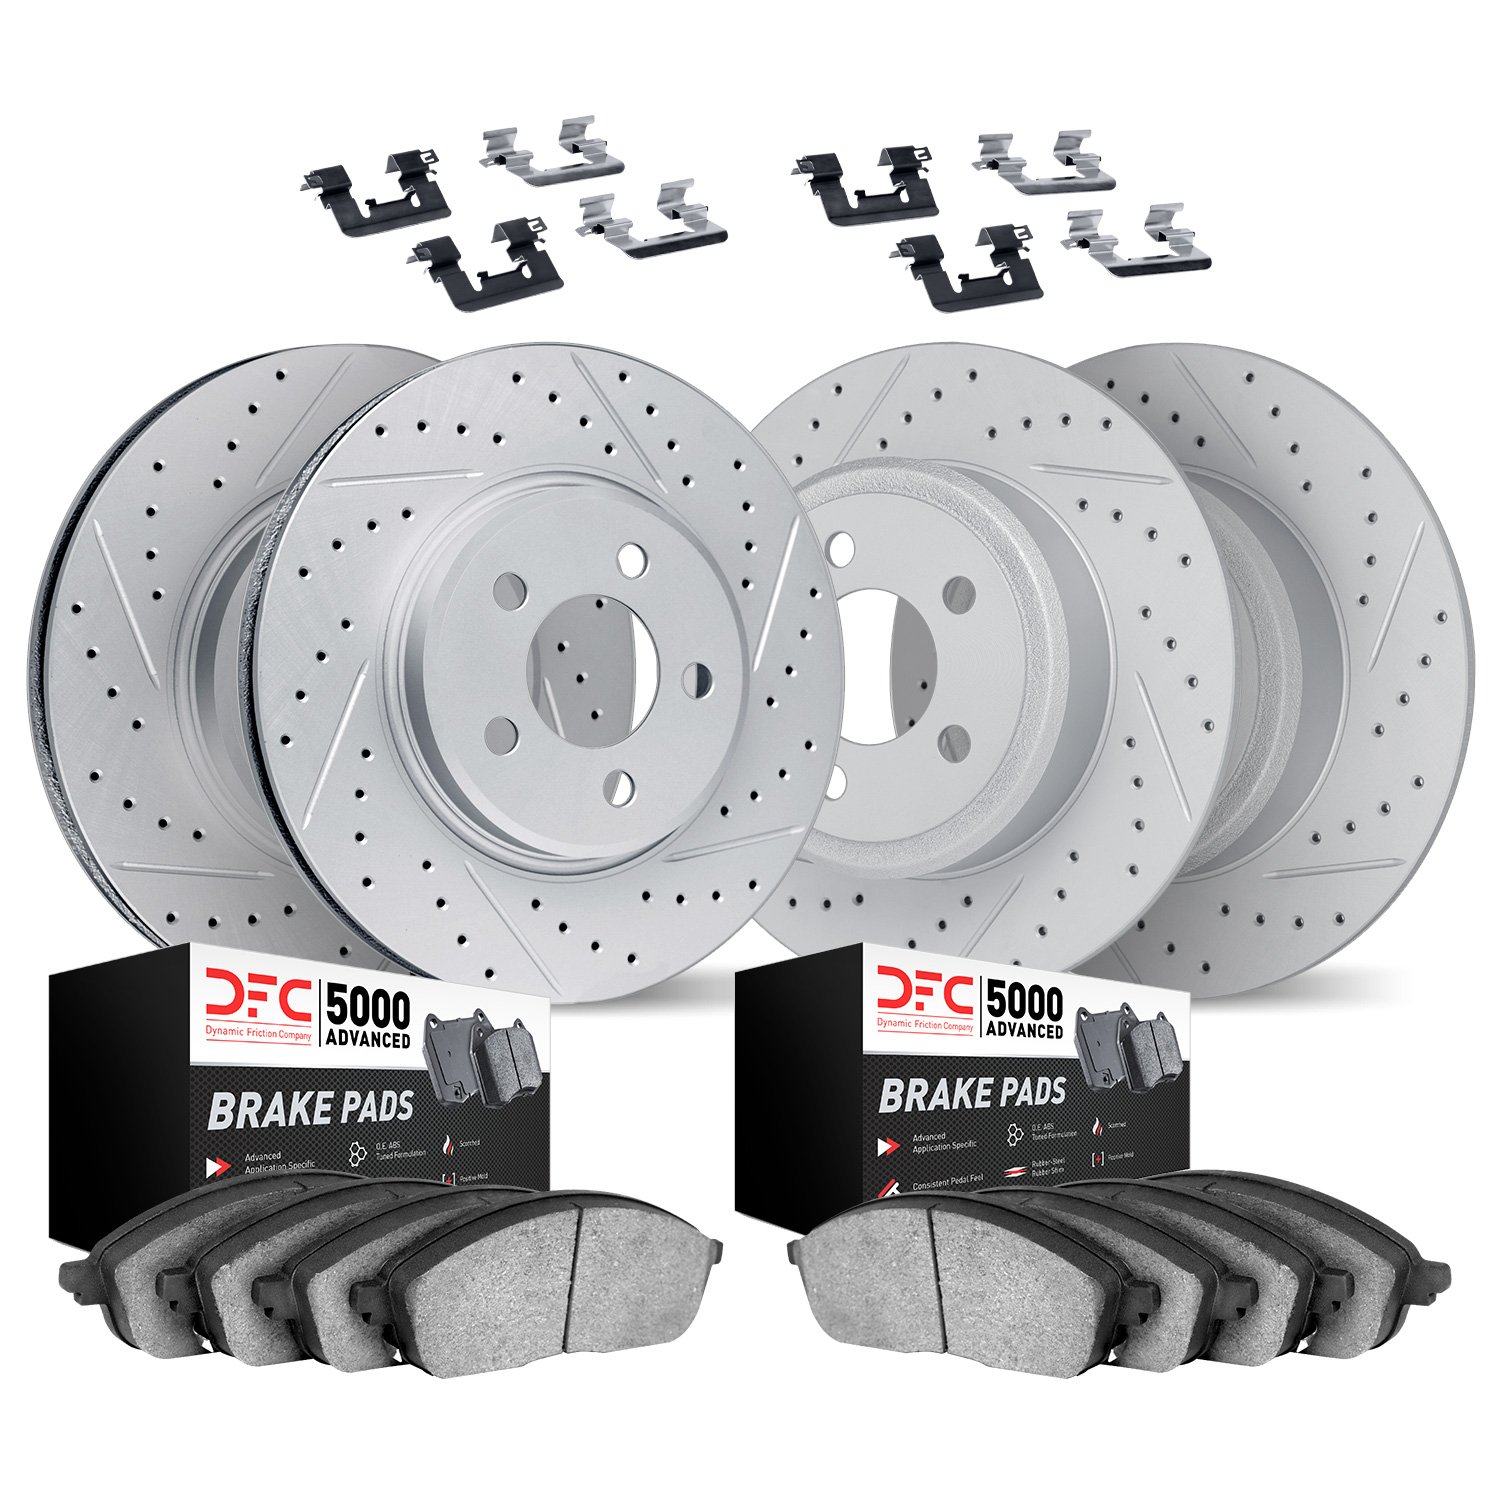 2514-80023 Geoperformance Drilled/Slotted Rotors w/5000 Advanced Brake Pads Kit & Hardware, Fits Select Ford/Lincoln/Mercury/Maz